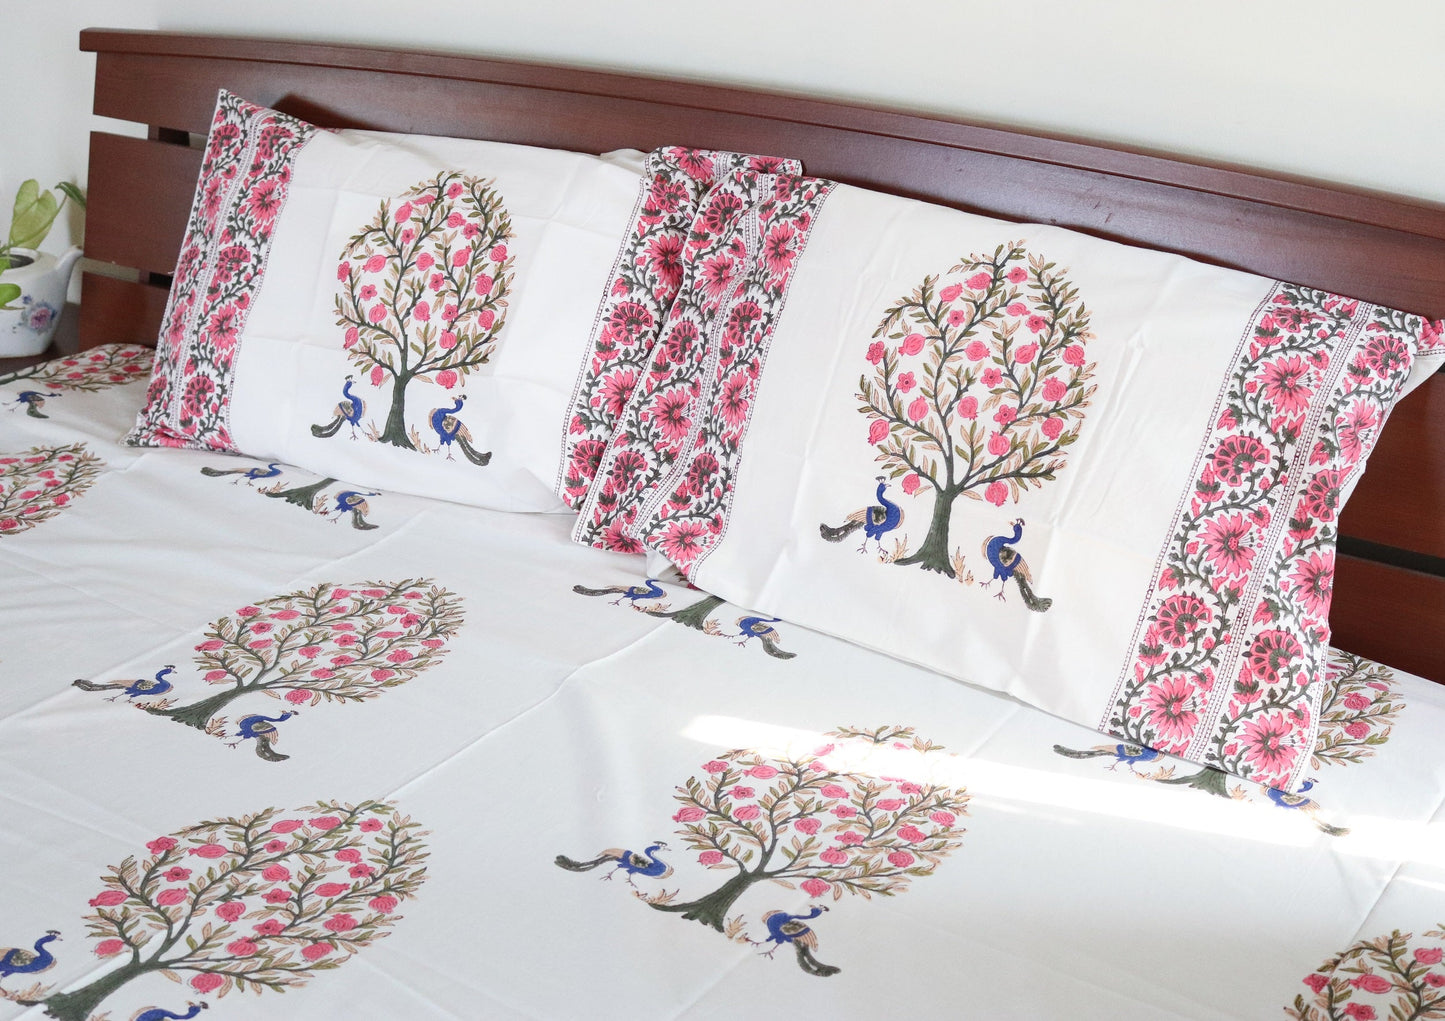 Peacock Block print bed sheet and pillow cases - Peacock and pomegranate bedsheet set-  King size bedsheet